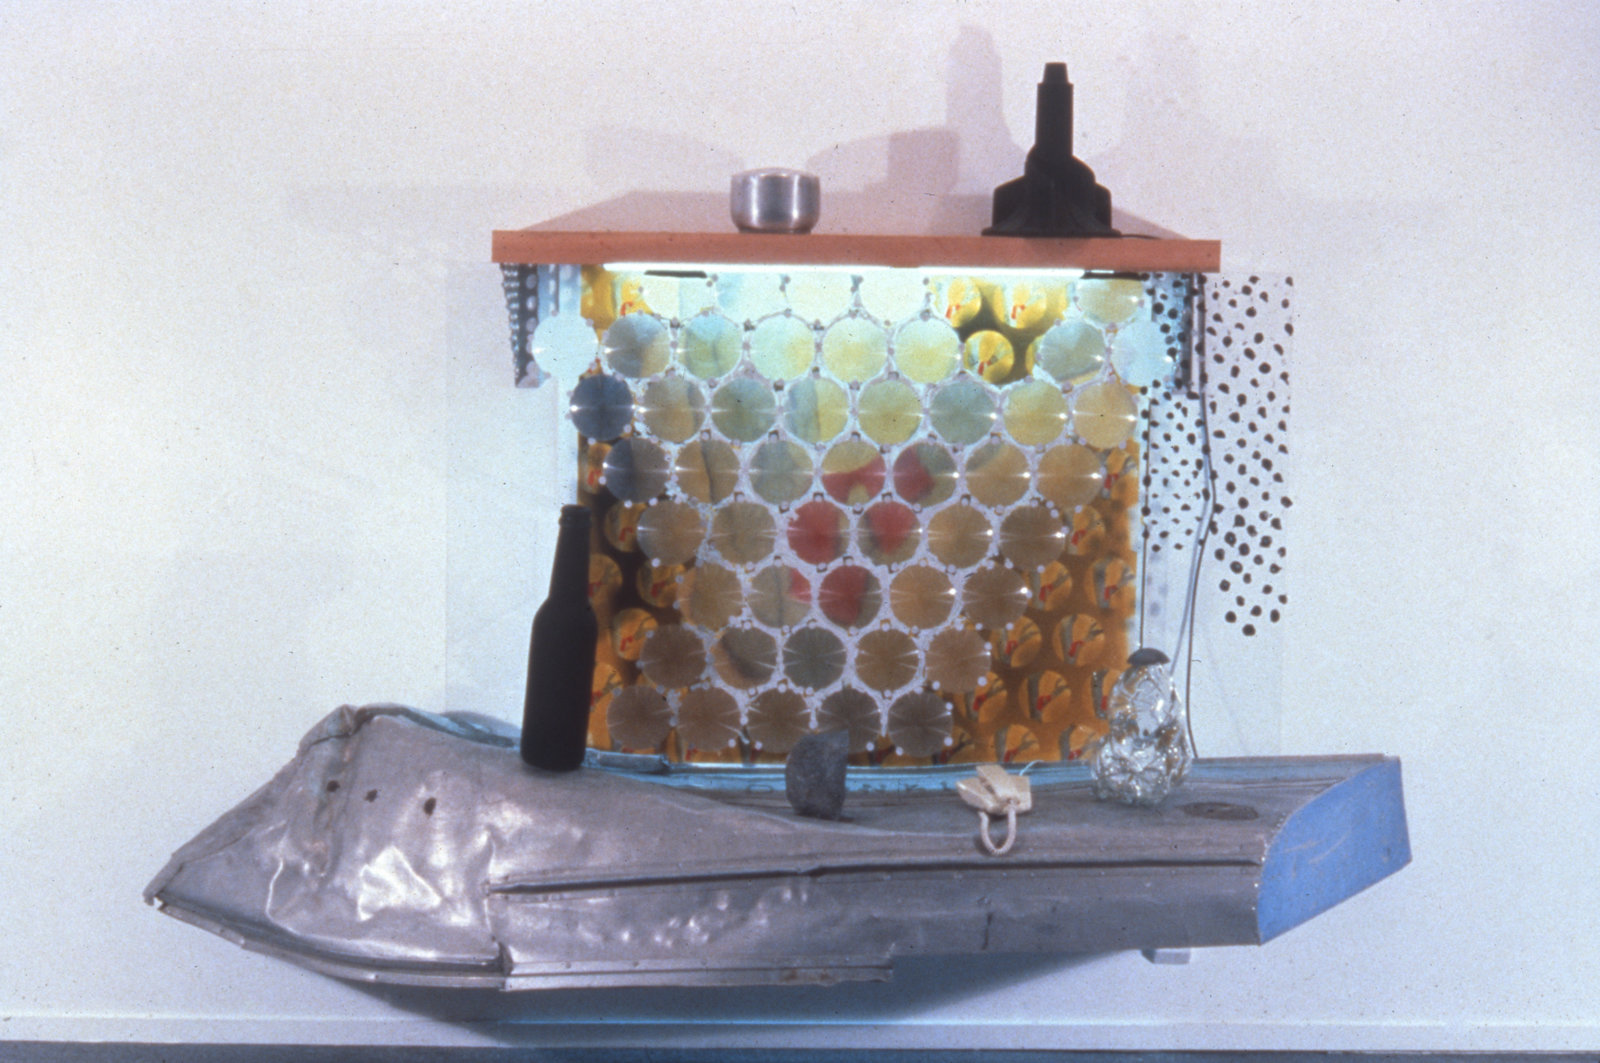 Jerry Pethick, Wreck of the D Jonkin, 1988–1994, photo array, aluminum, wood, silicone, bakelite, plastic, telephone, recorder, sound, light, fixture, glass, stone, 11 x 9 x 3 in. (28 x 23 x 8 cm)